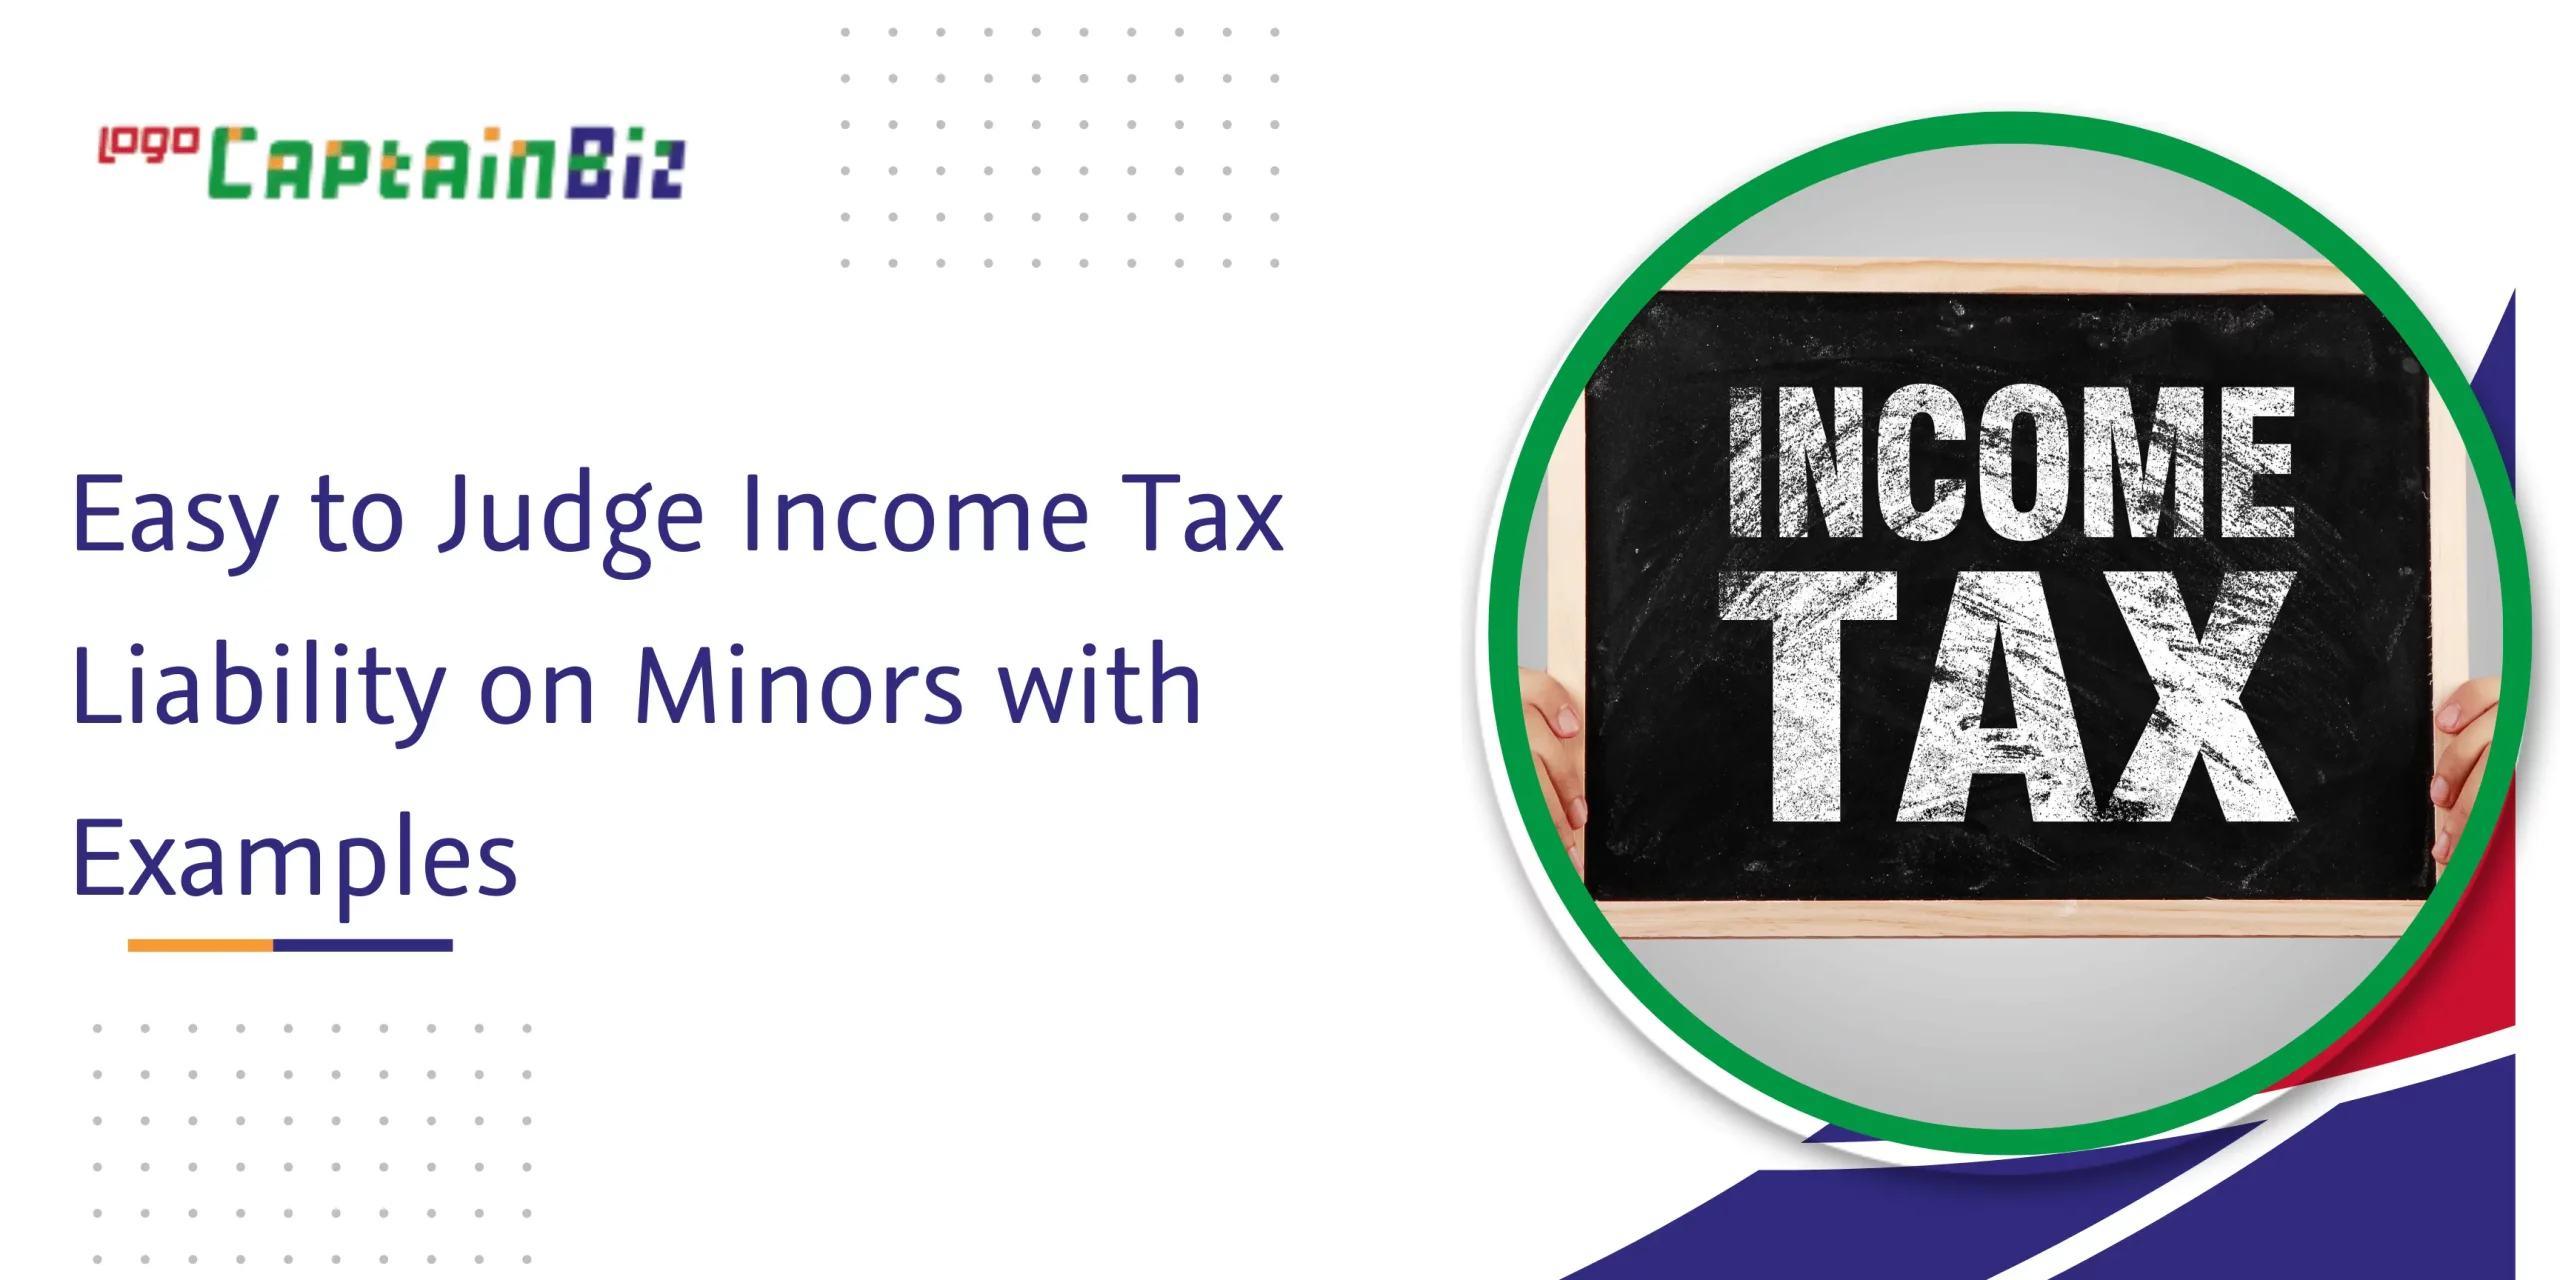 CaptainBiz: easy to judge income tax liability on minors with examples